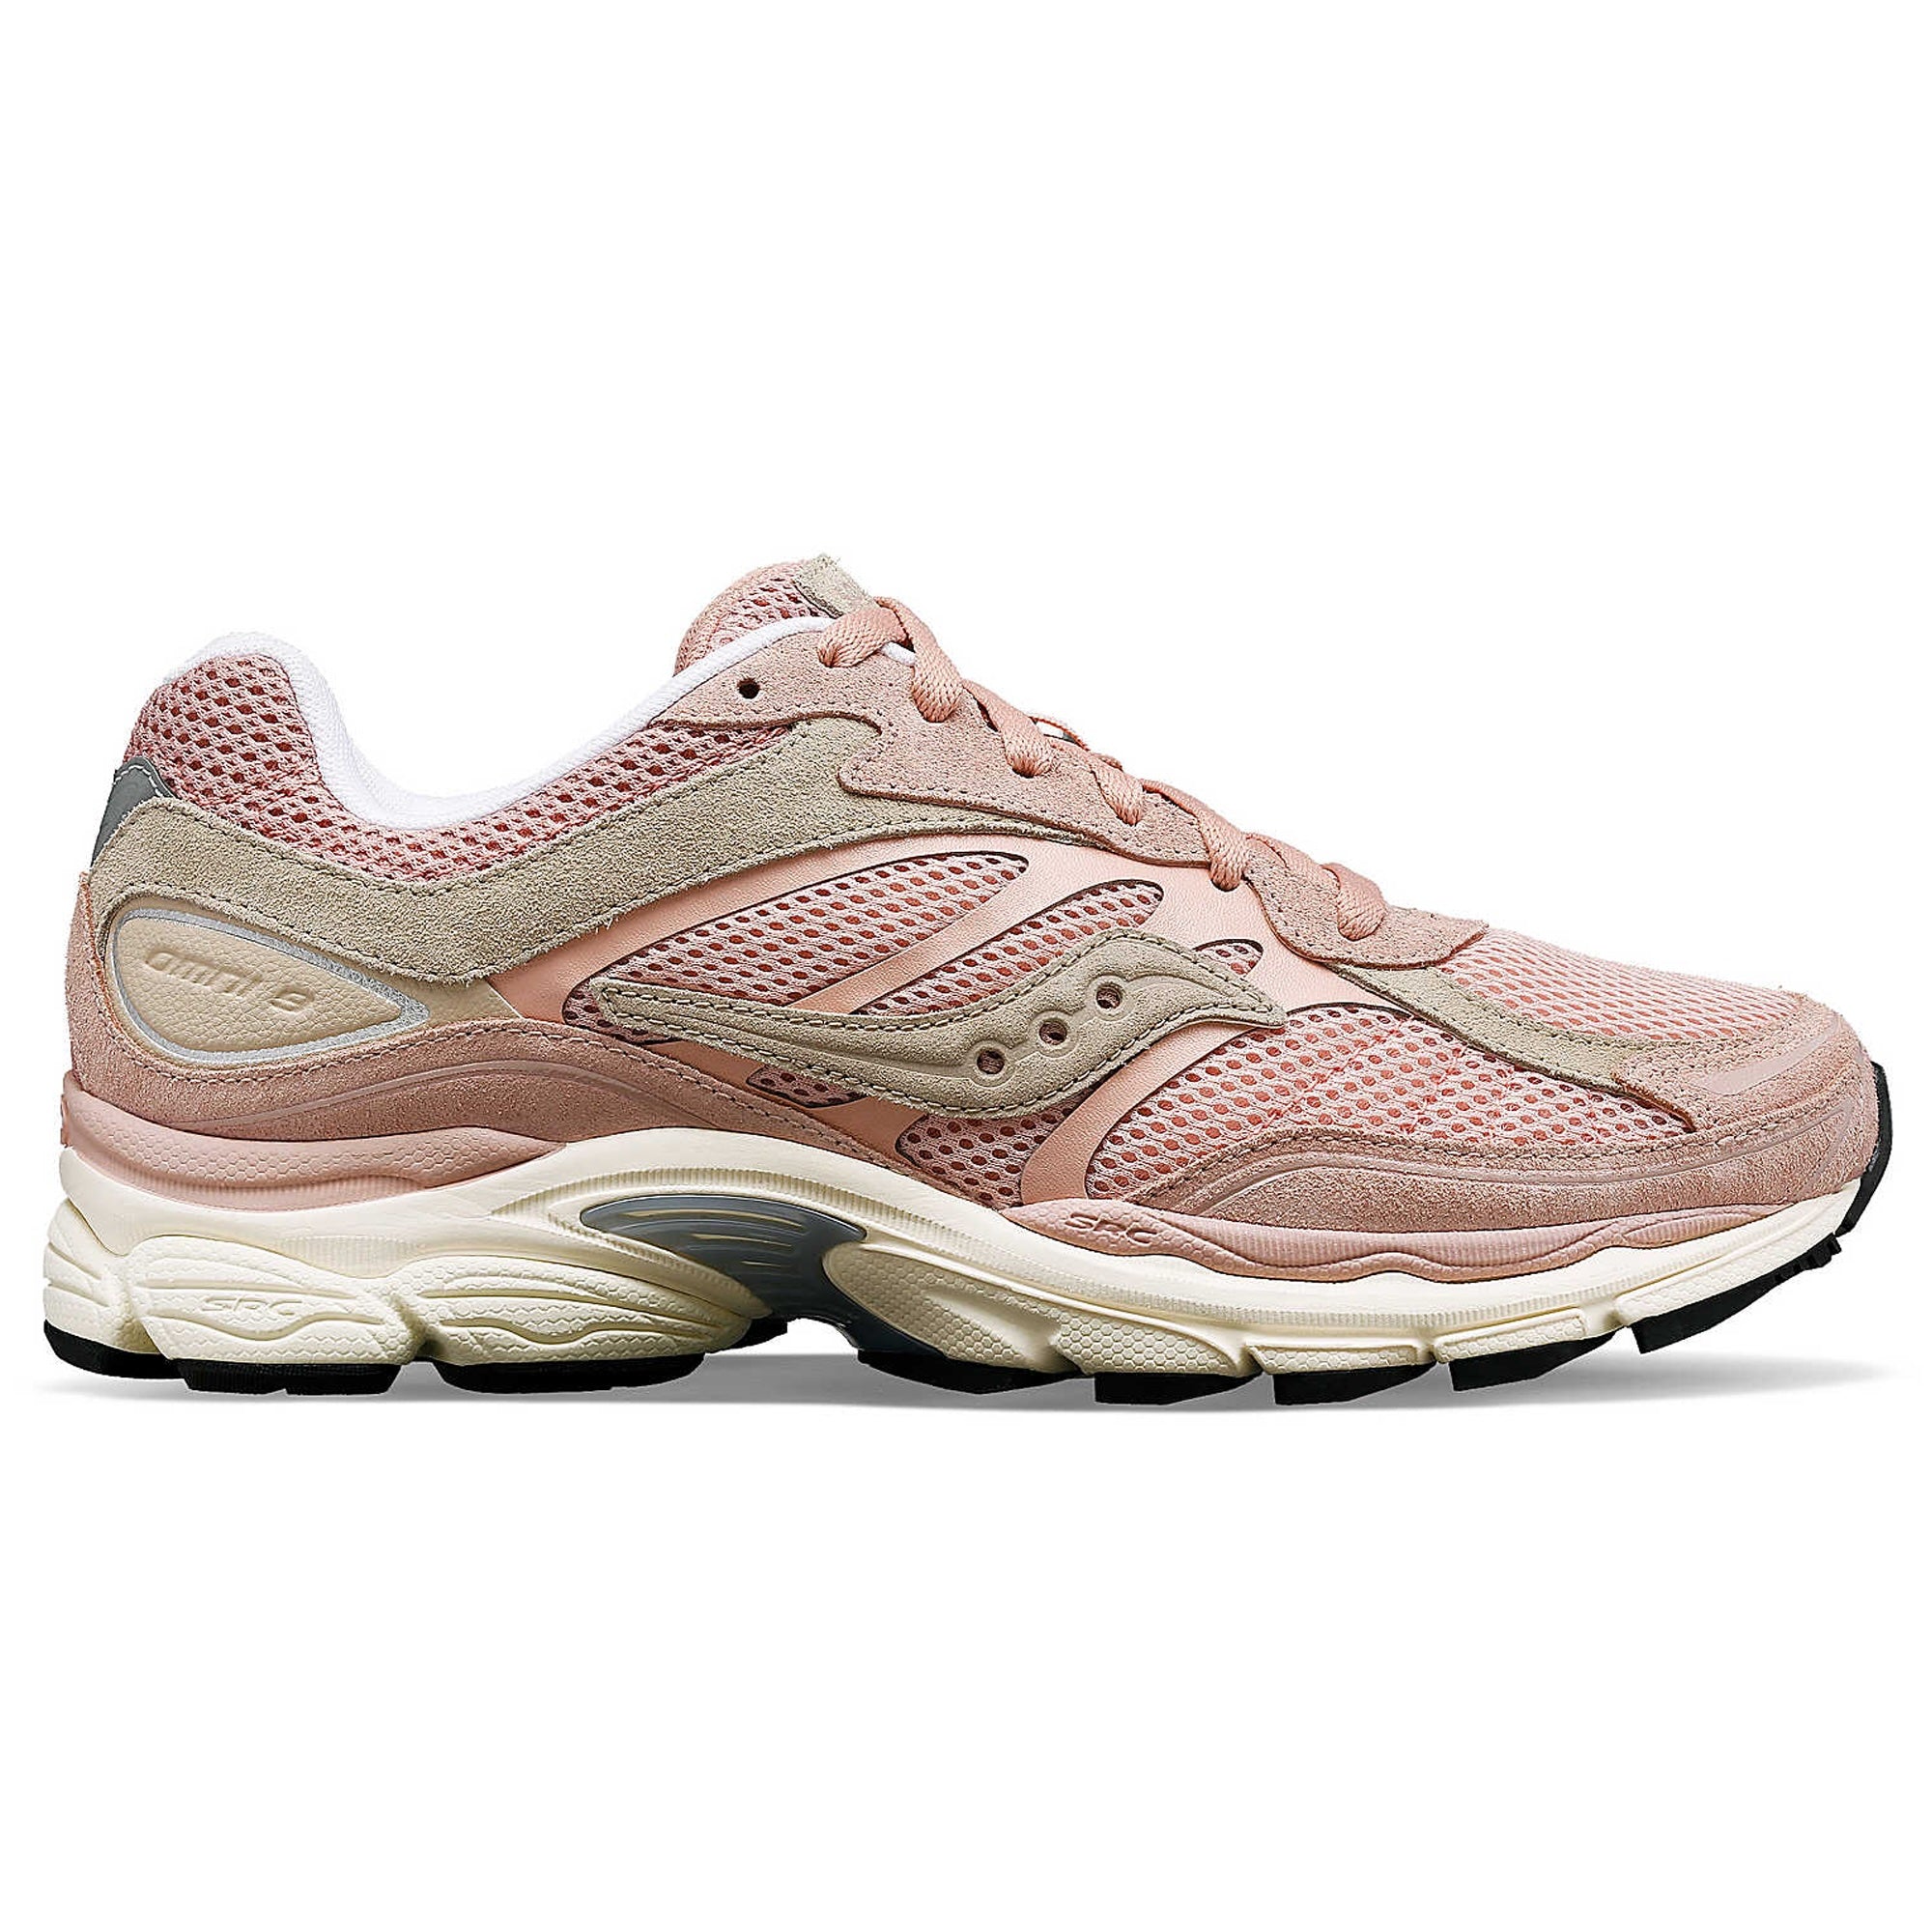 Saucony Pro Grid Omni 9 Trainers - Pink